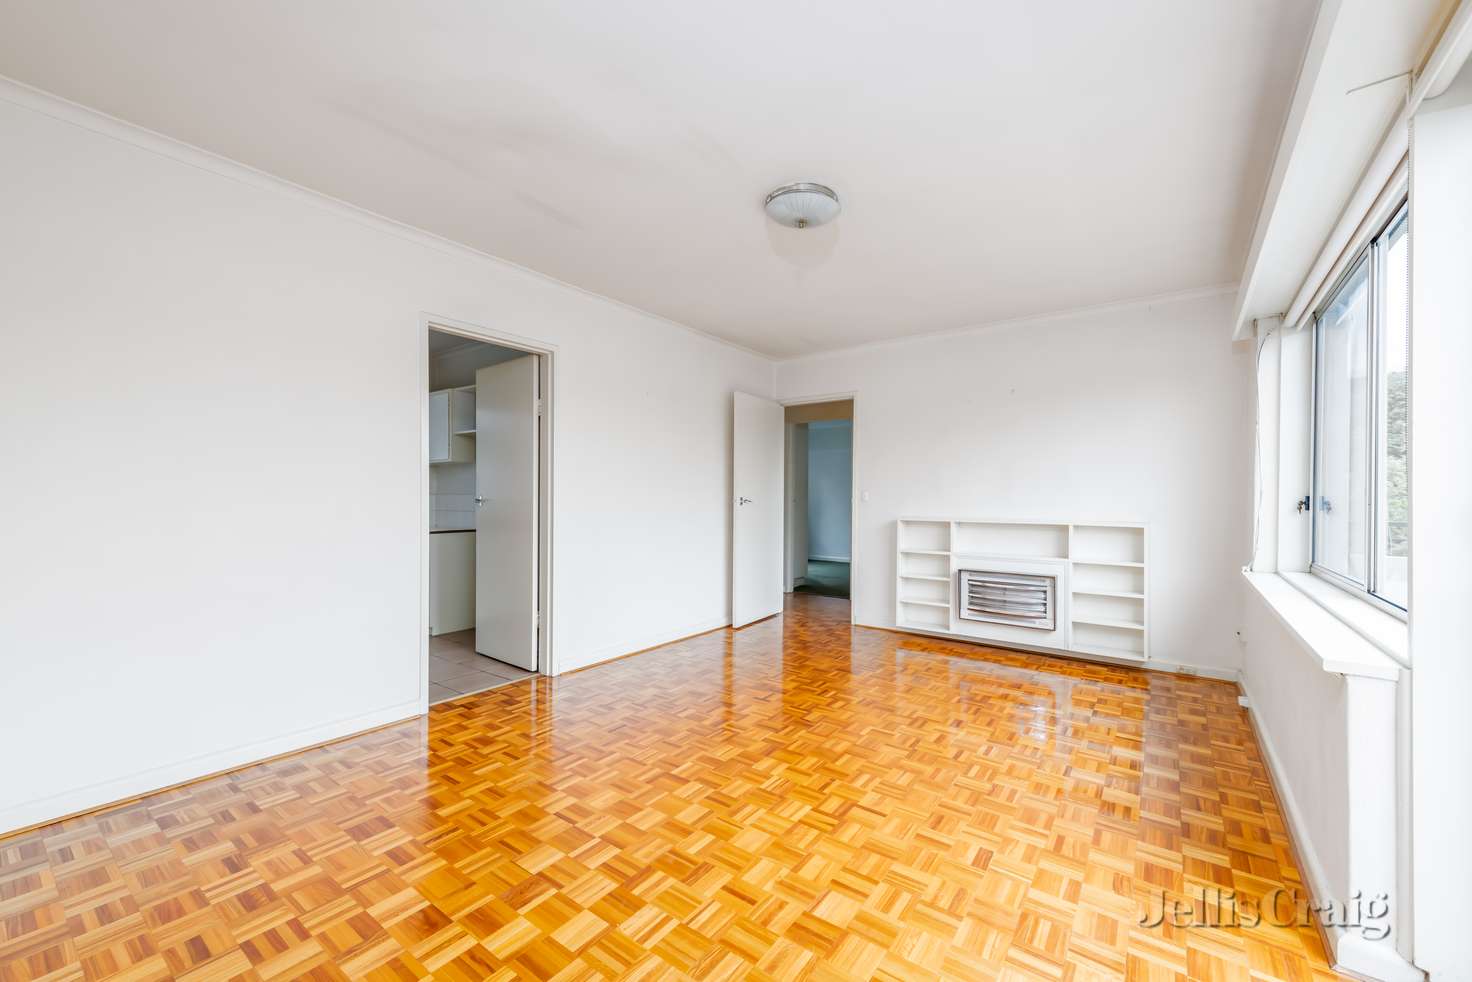 Main view of Homely apartment listing, 11/117 Manningham Street, Parkville VIC 3052